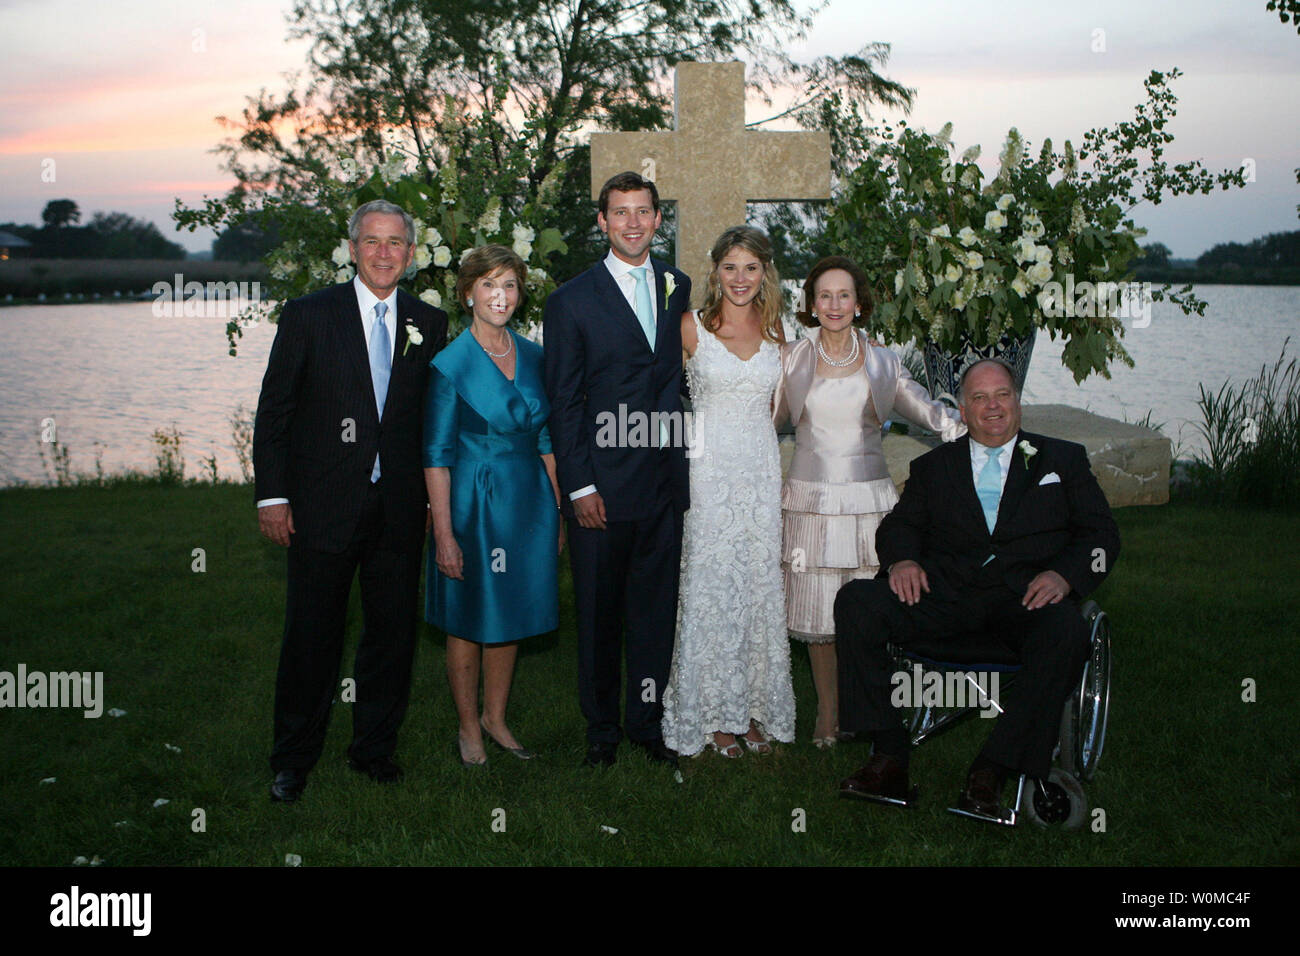 President George W. Bush and Mrs. Laura Bush and Mr. and Mrs. Hager pose with the newly married couple, Jenna and Henry Hager, in front of the altar on Prairie Chapel Ranch near Crawford, Texas on May 10, 2008.  Photo released by White House on May 11th.   (UPI Photo/White House/Shealah Craighead) Stock Photo